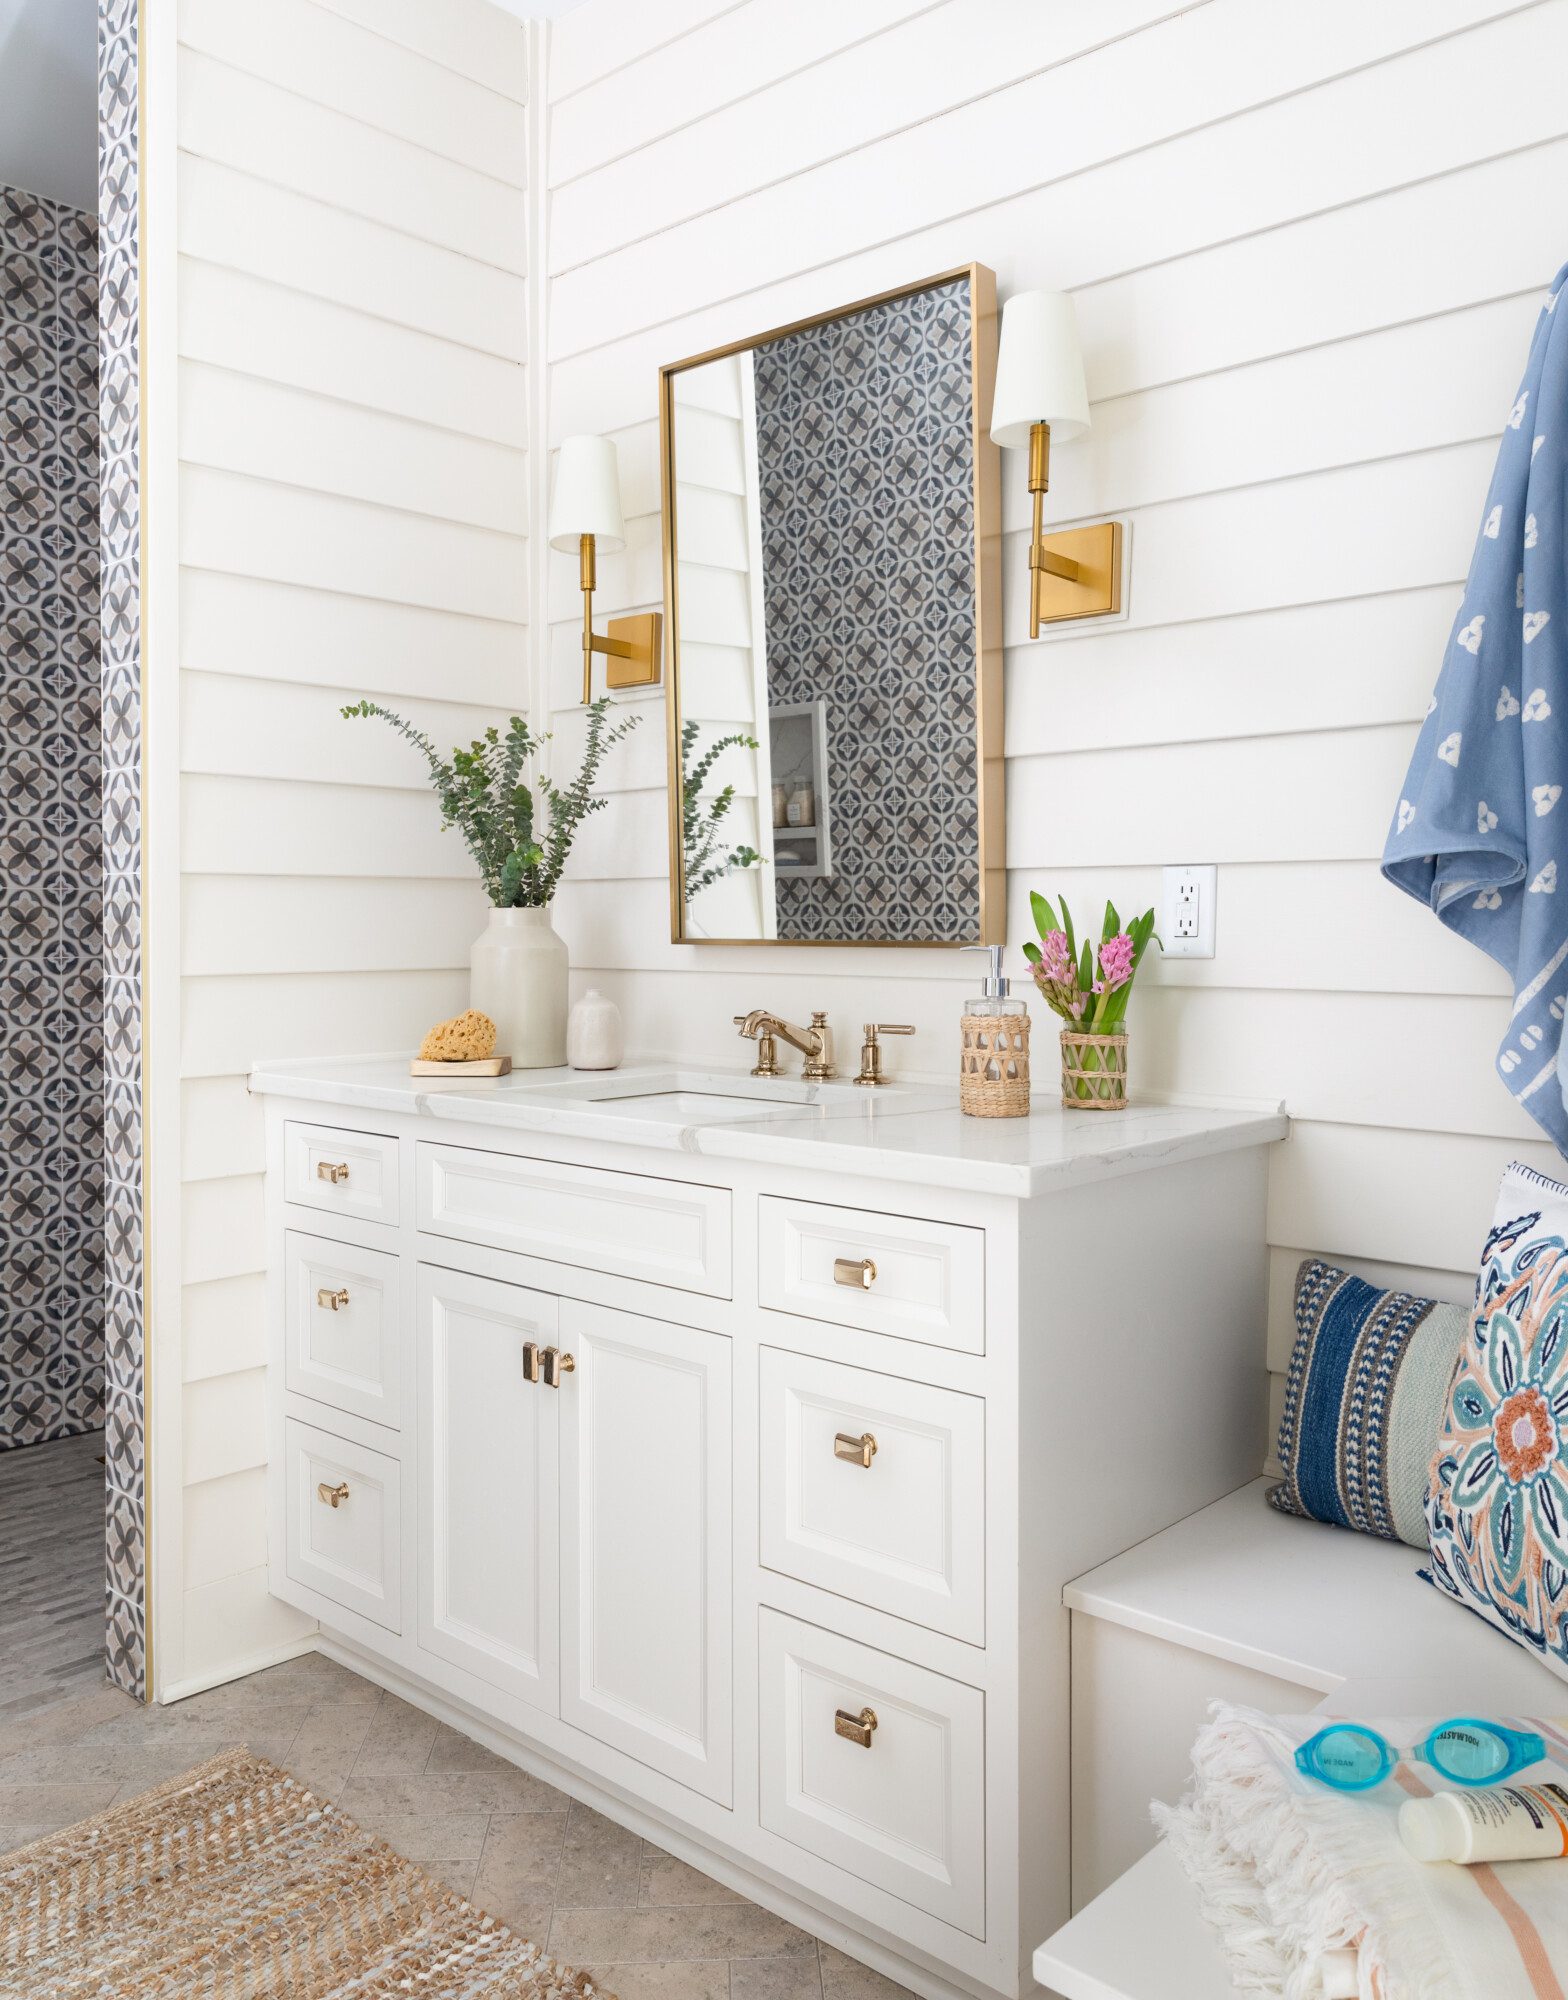 Bright bathroom white with gold accents